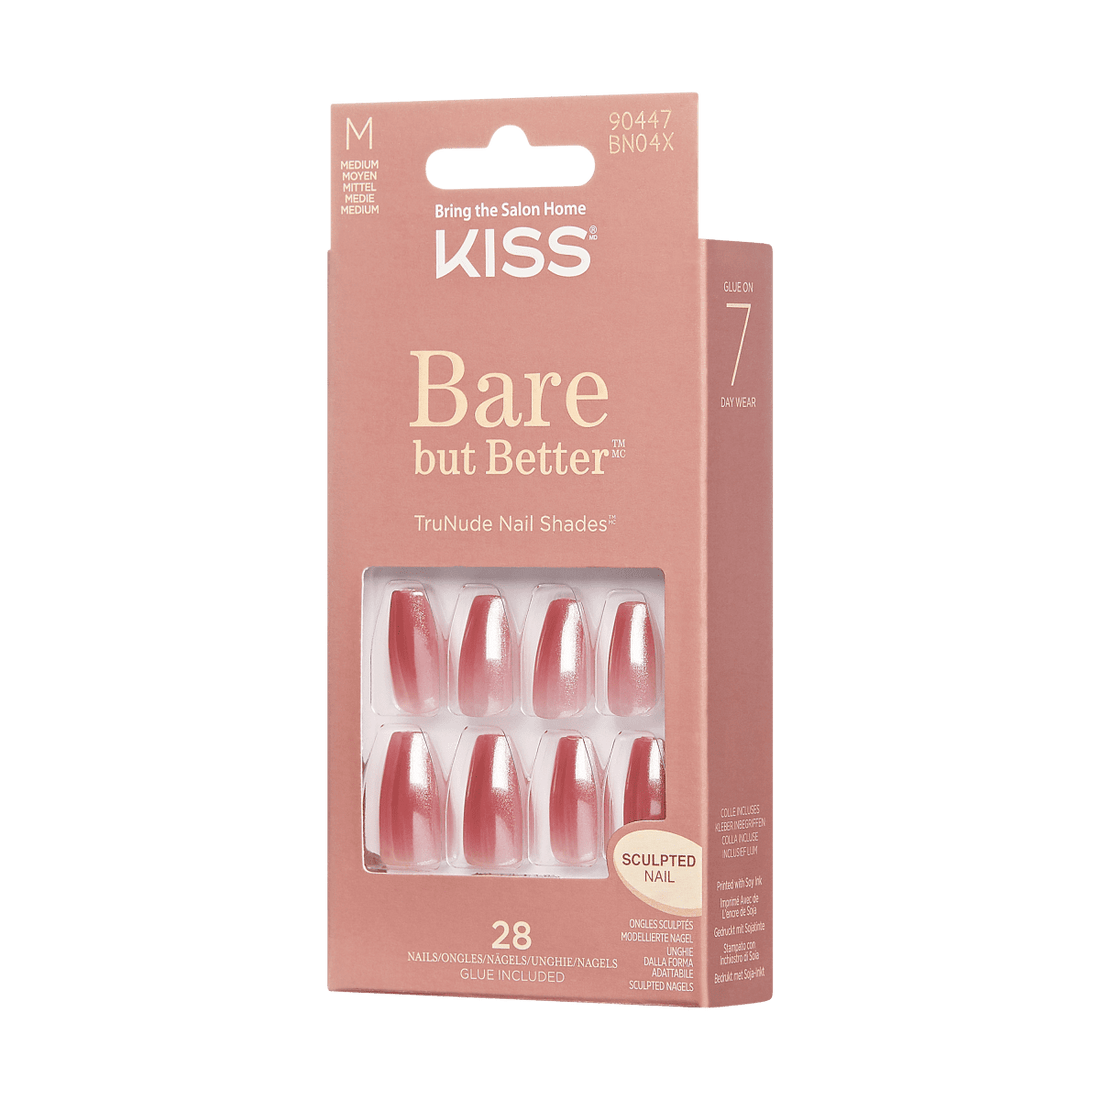 KISS Bare But Better, Press-On Nails, Dawn, Pink, Med Coffin, 28ct